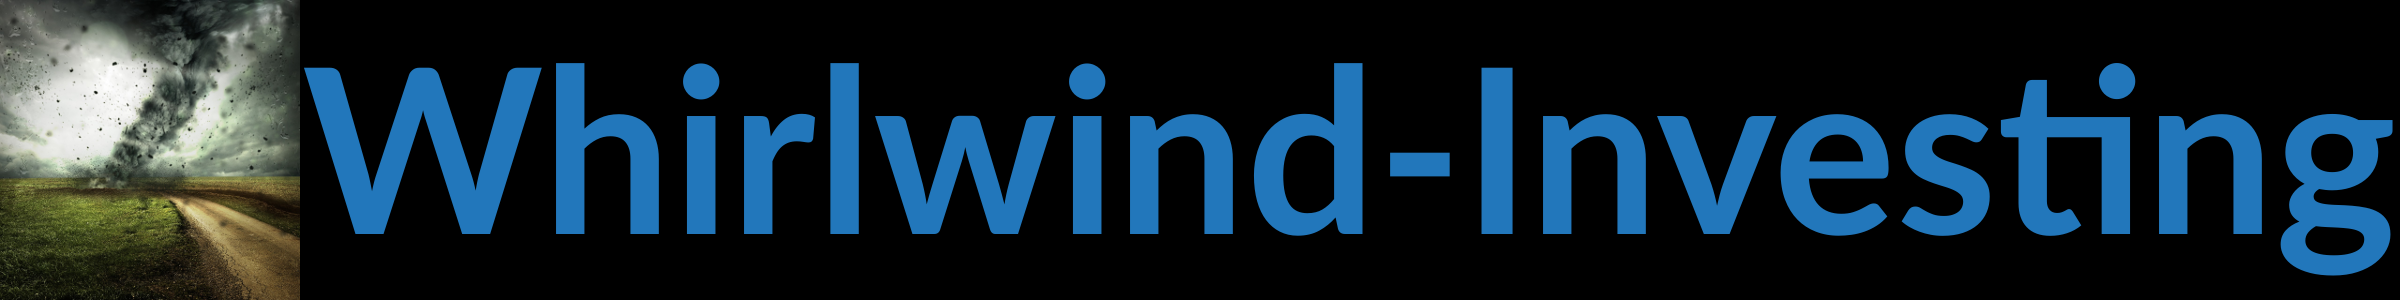 Whirlwind-Investing_Banner